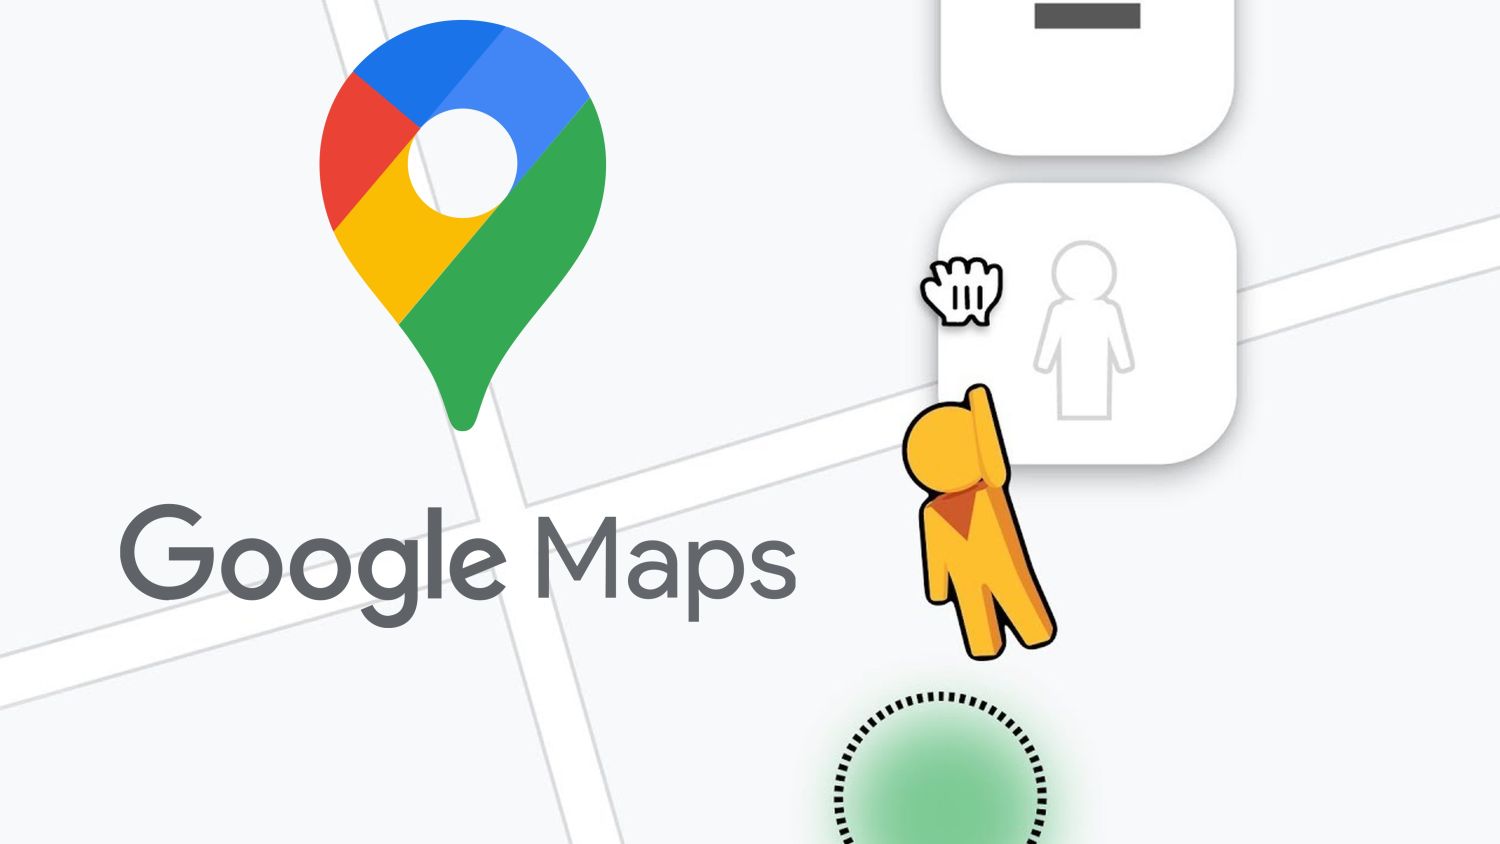 How to use Google Maps offline: It's easier than you think